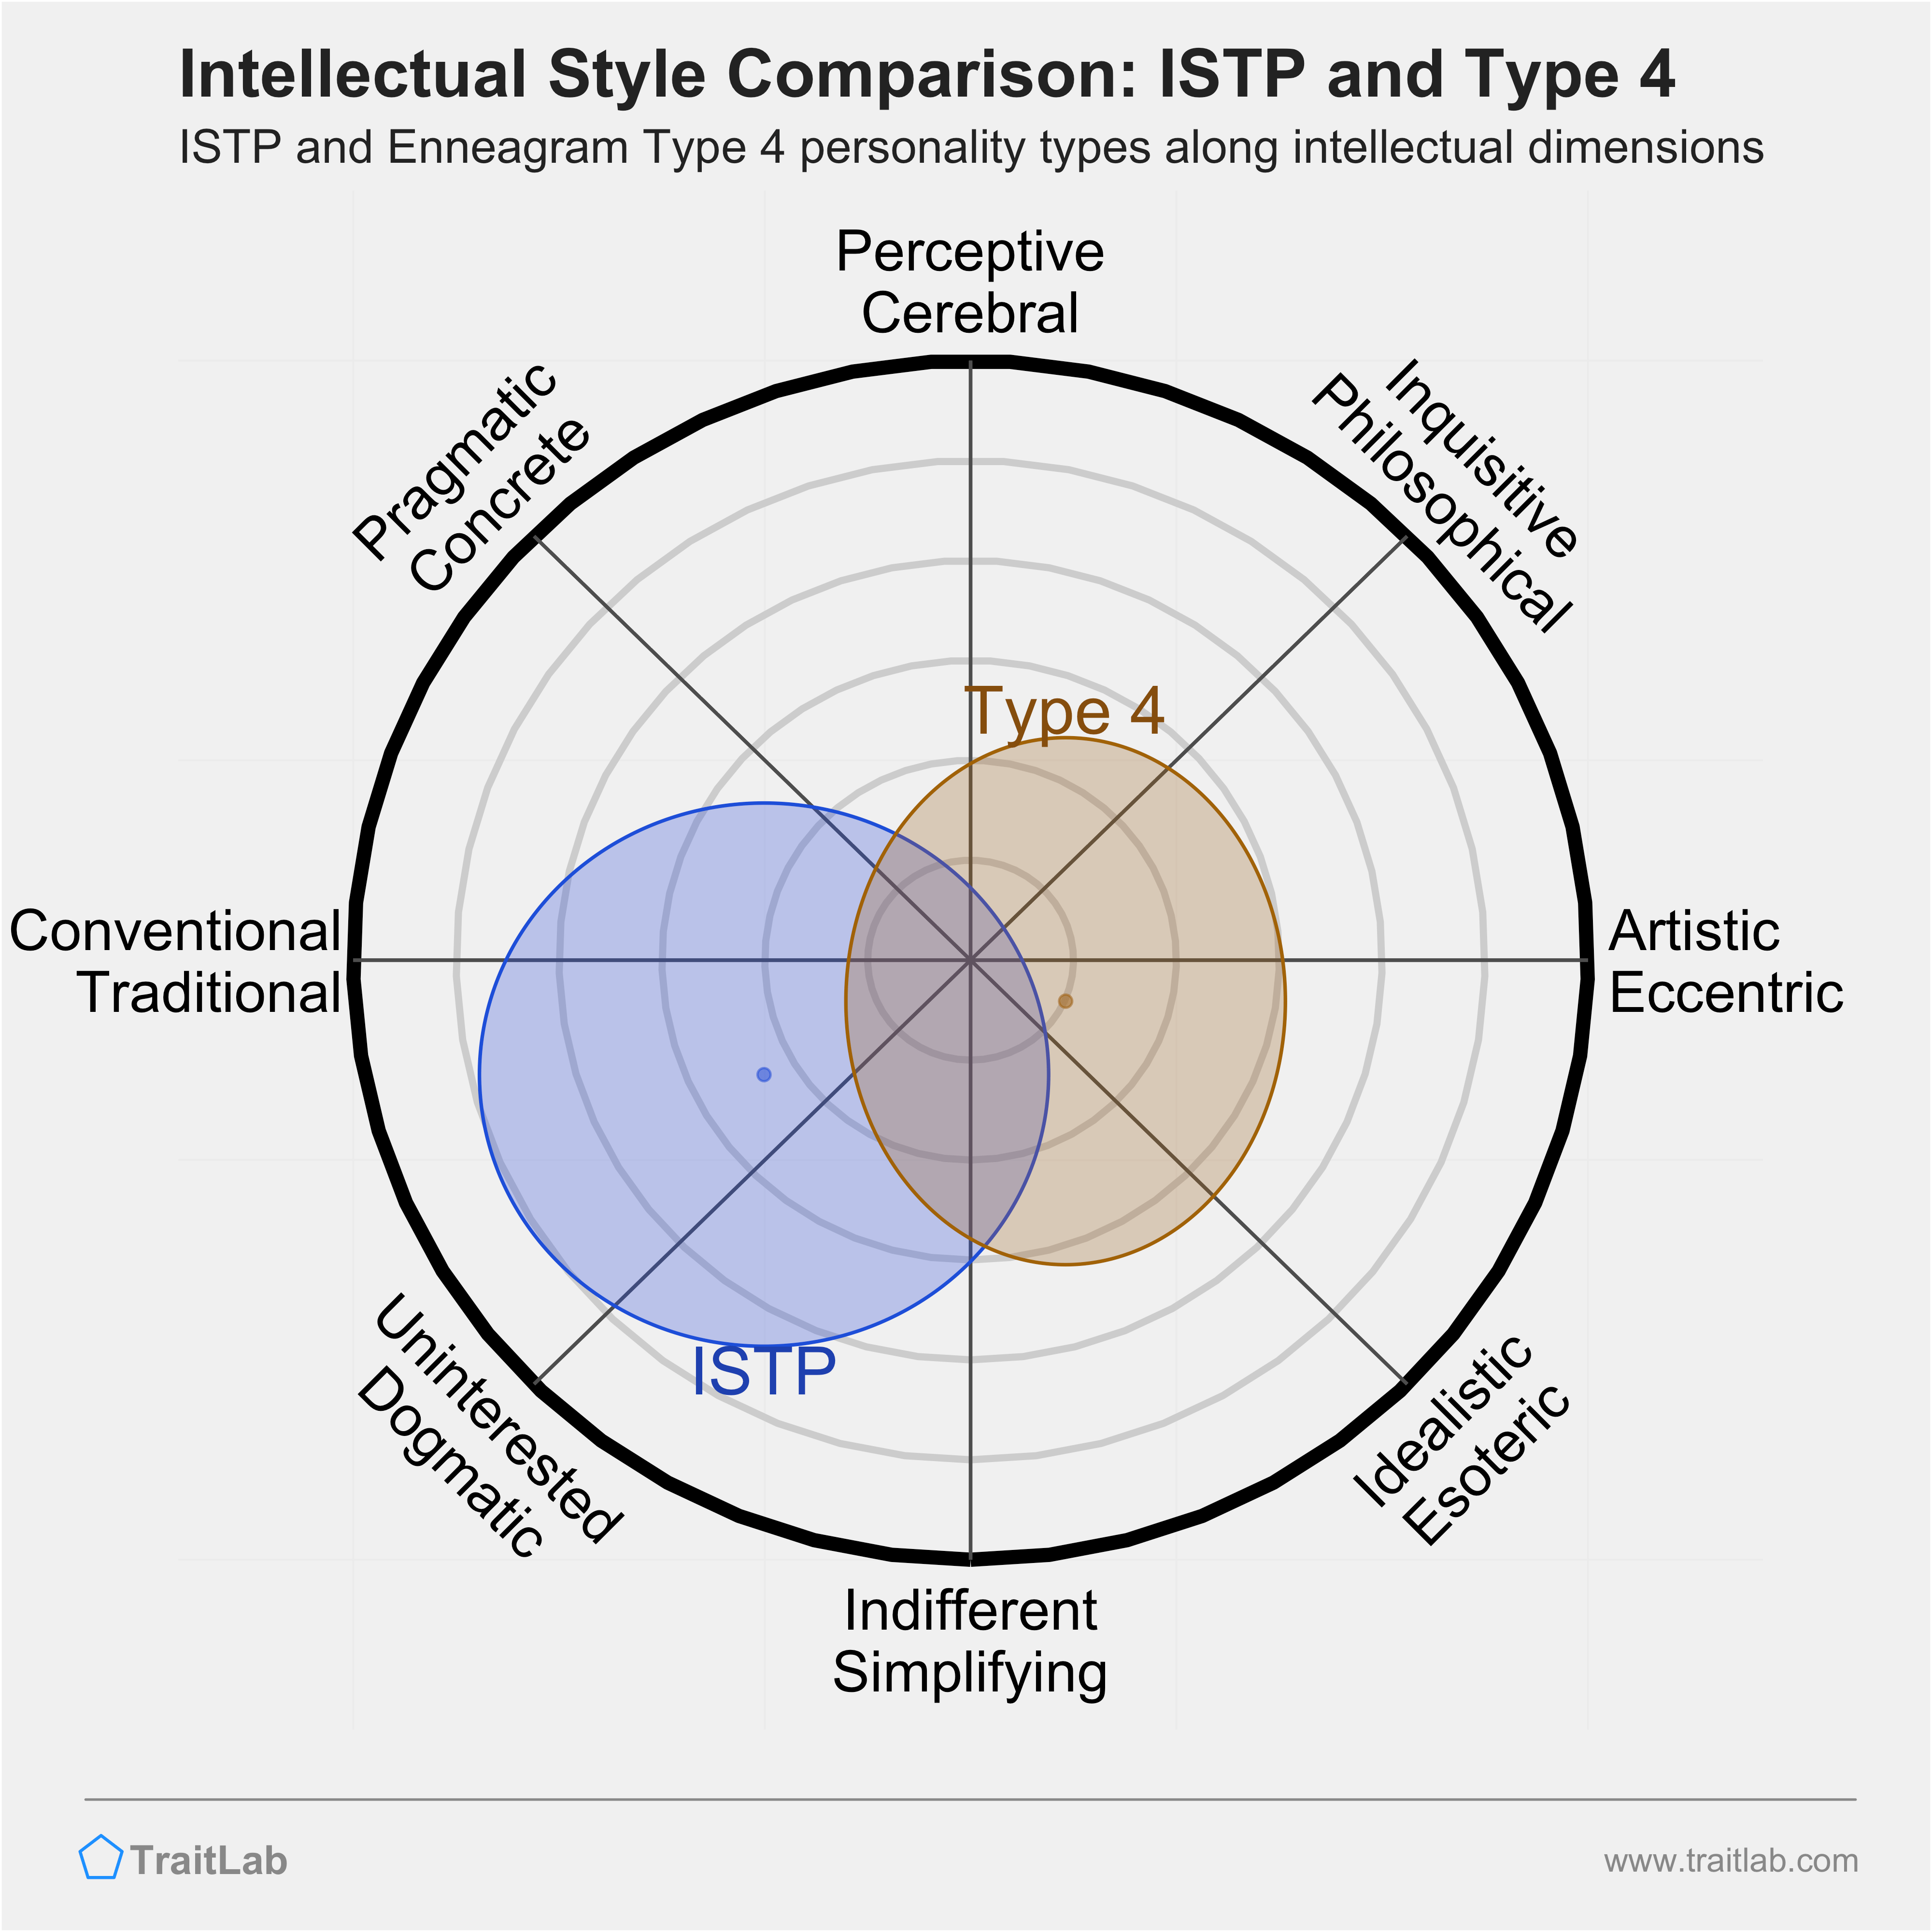 ISTP and Type 4 comparison across intellectual dimensions